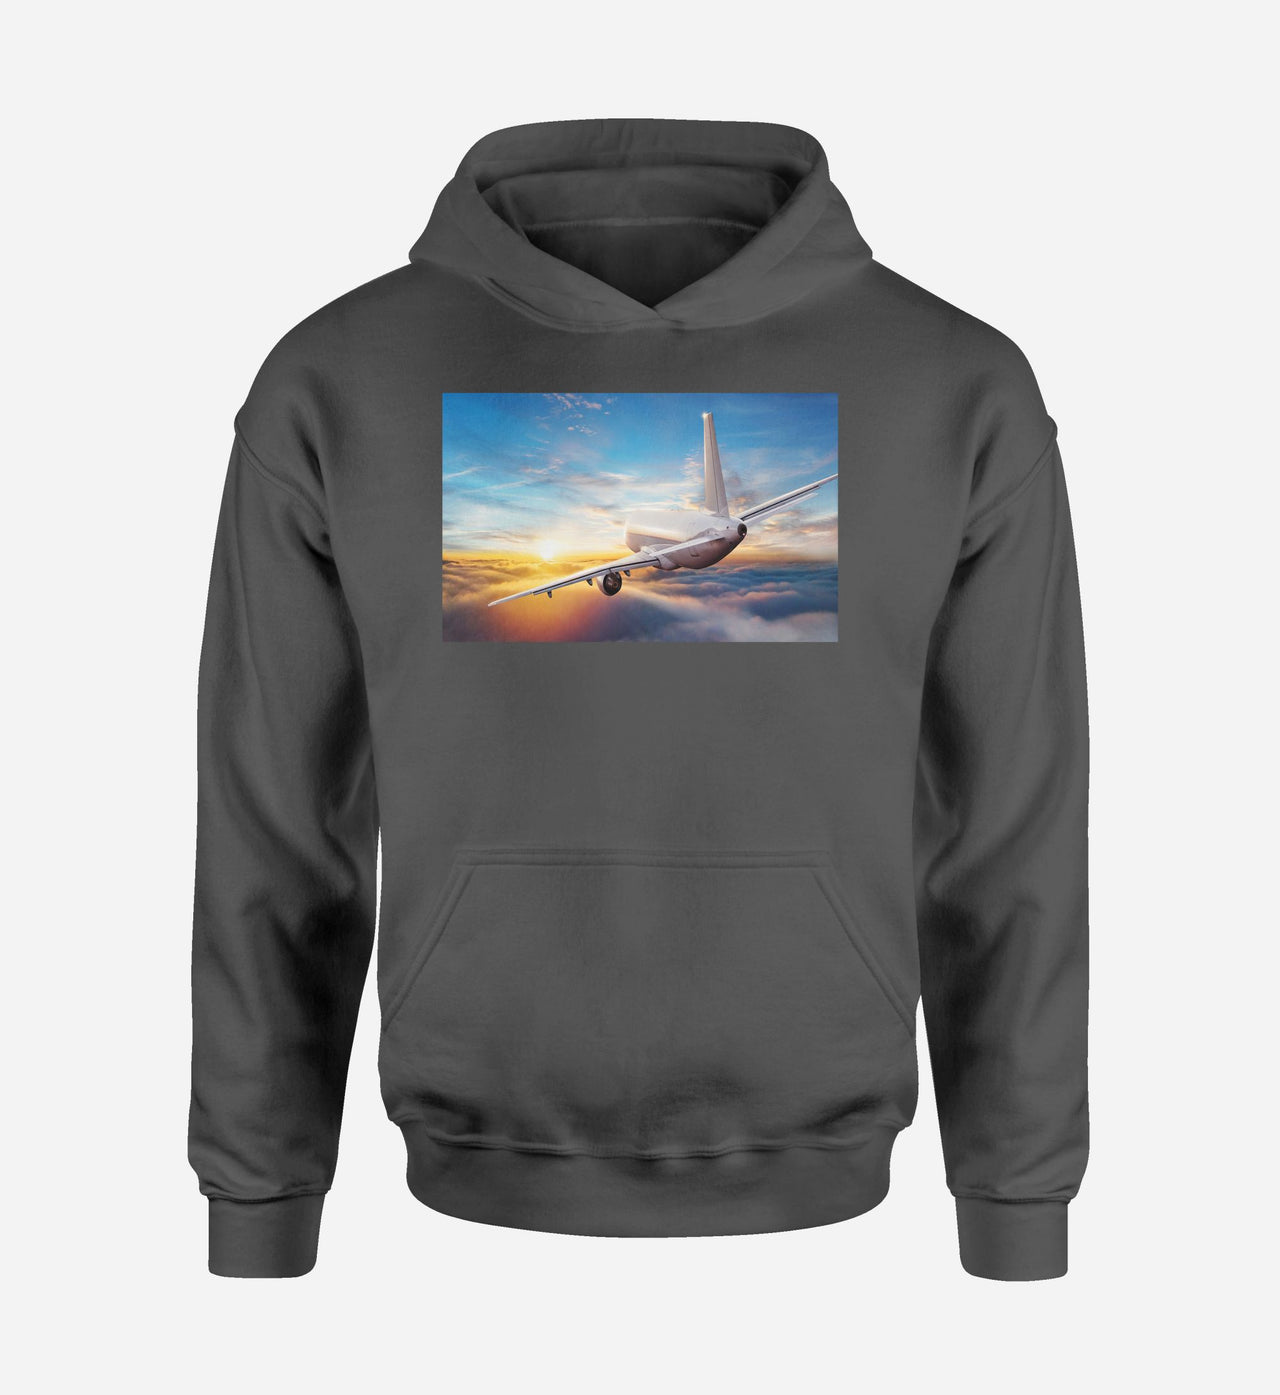 Airliner Jet Cruising over Clouds Designed Hoodies